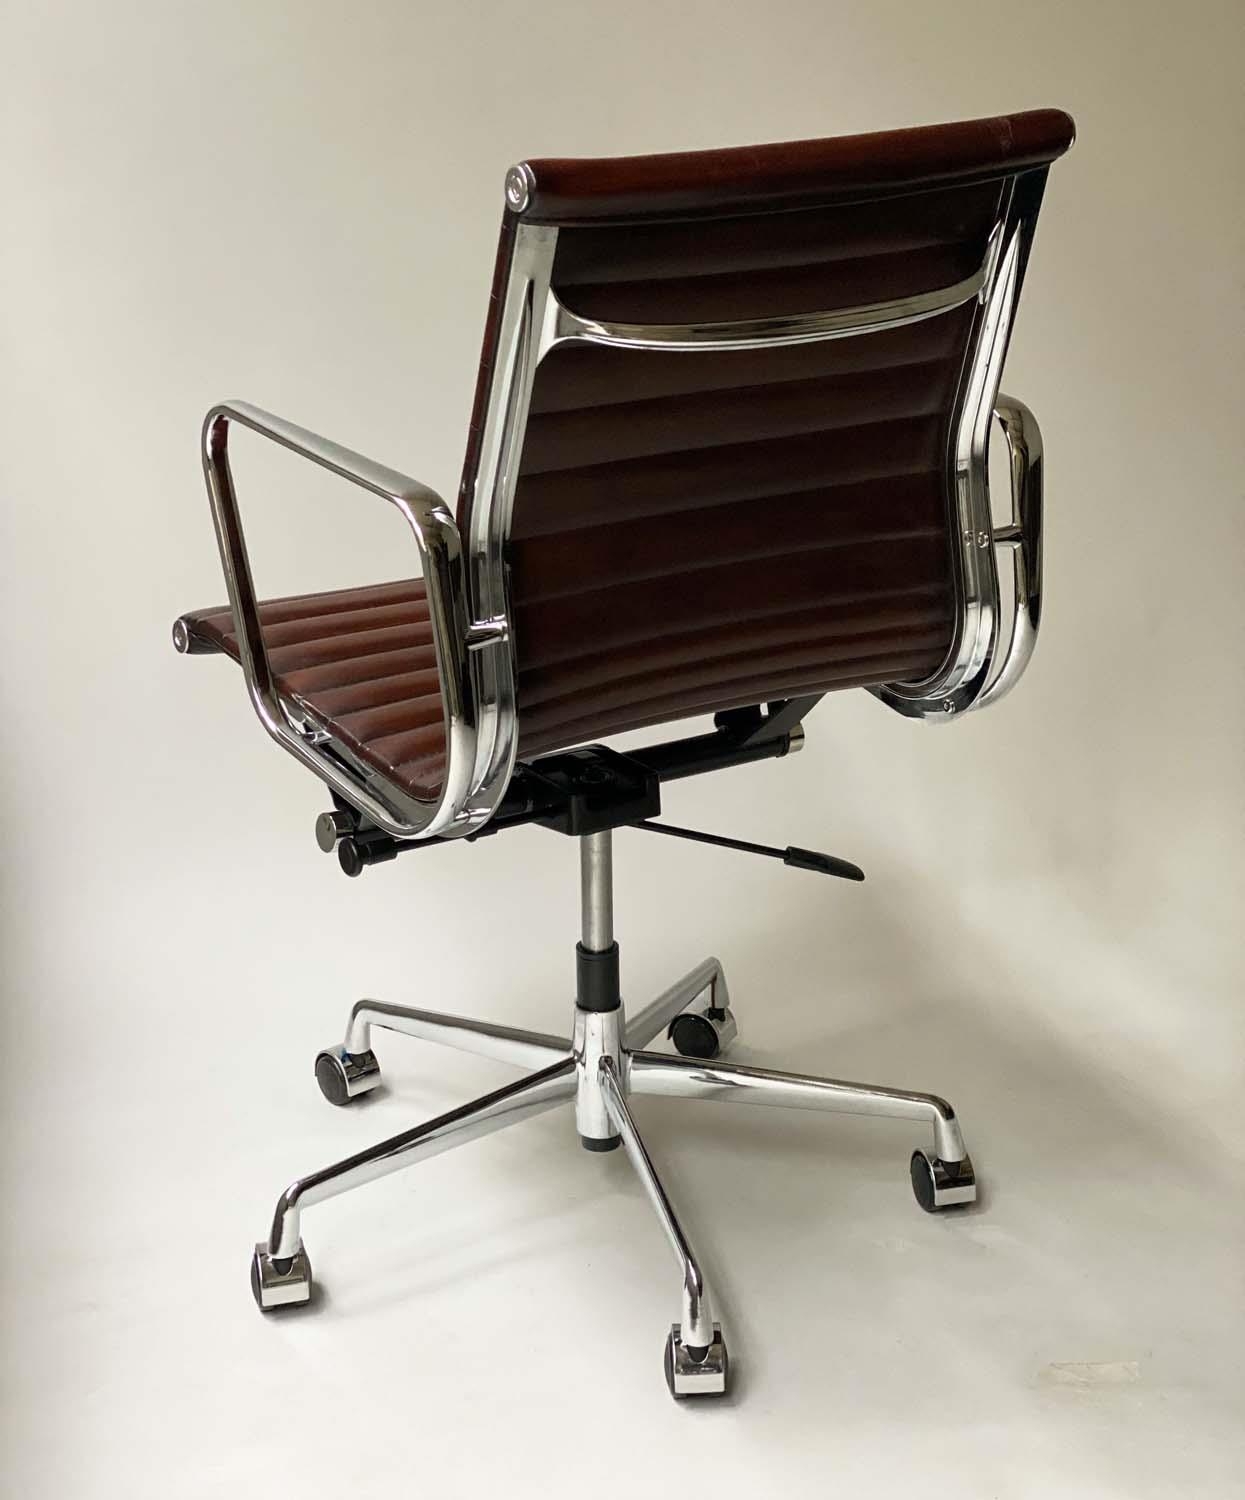 REVOLVING DESK CHAIR, Charles and Ray Eames inspired ribbed tan leather seat revolving and reclining - Image 7 of 7